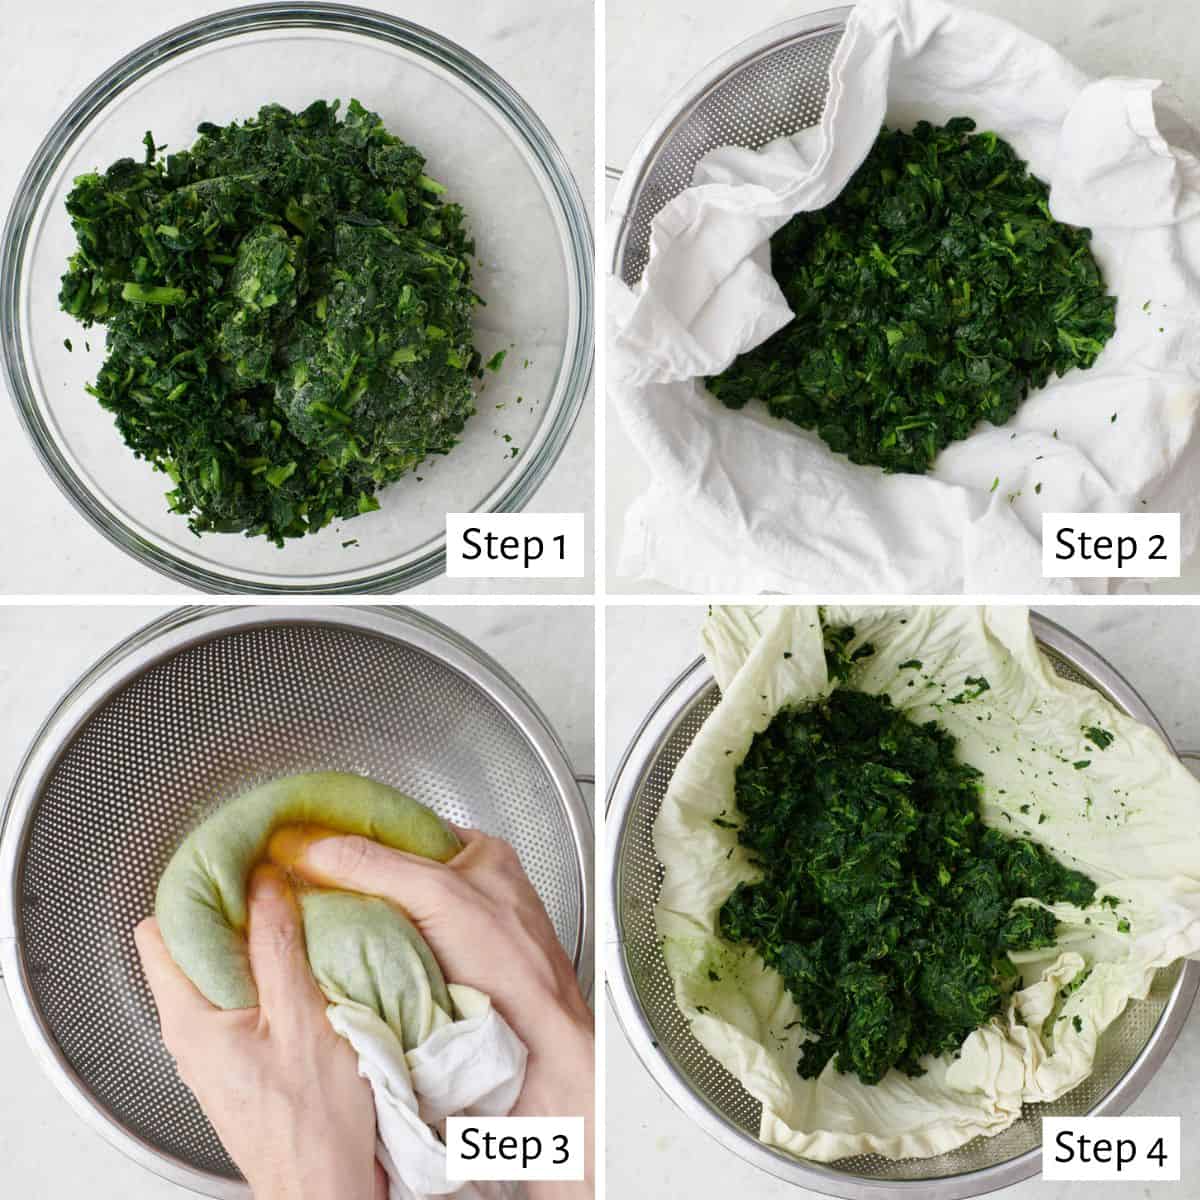 4 image collage preparing spinach: 1- frozen spinach in a bowl, 2- thawed spinach on a towel over sieve, step 3- towel closed with hands squeezing it to remove liquid, 4- spinach on opened towel after moisture removed.